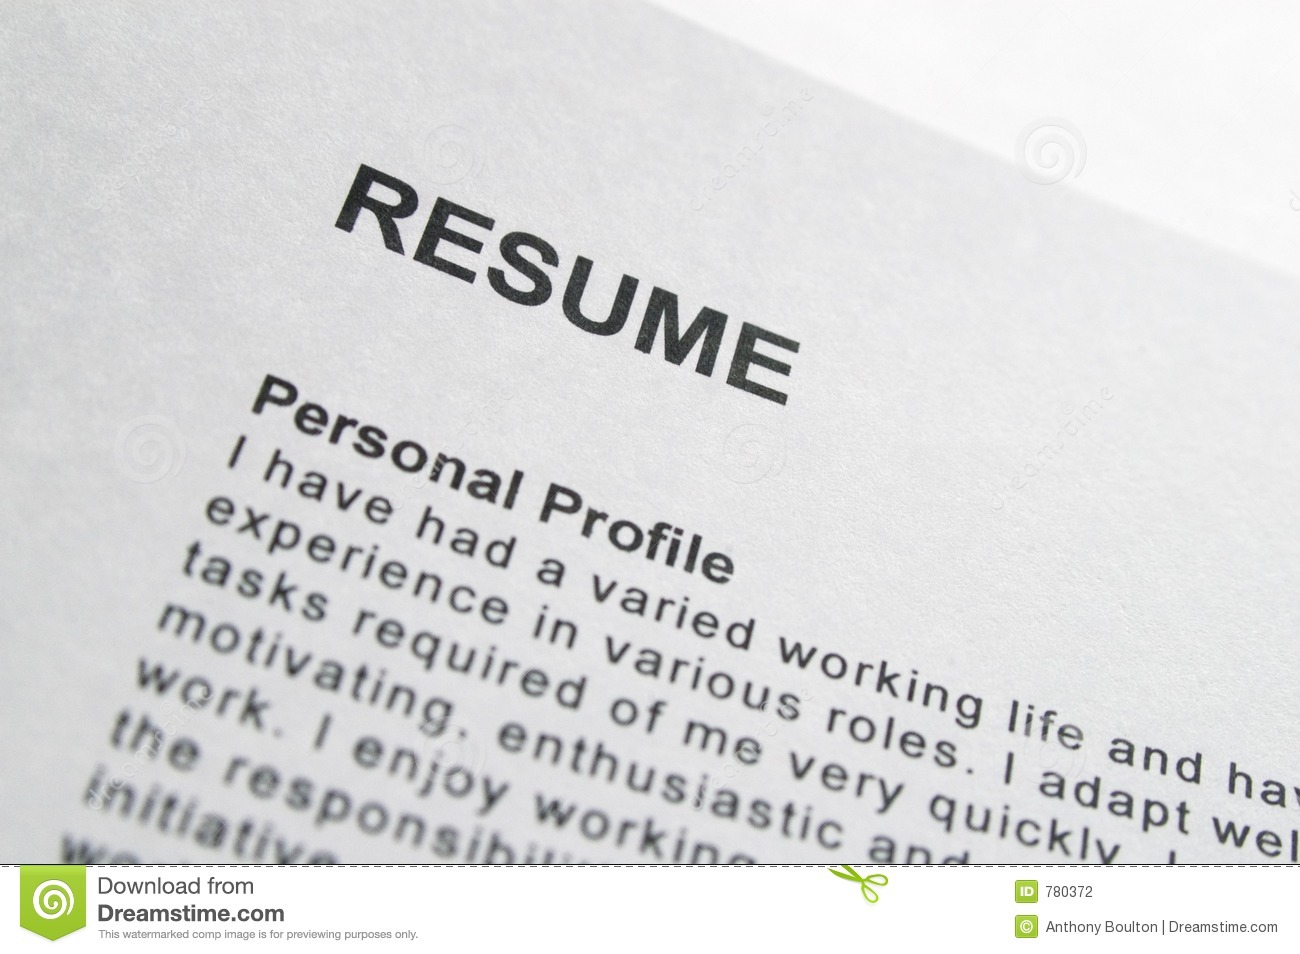 Resume Title Page Stock Photography   Image  780372